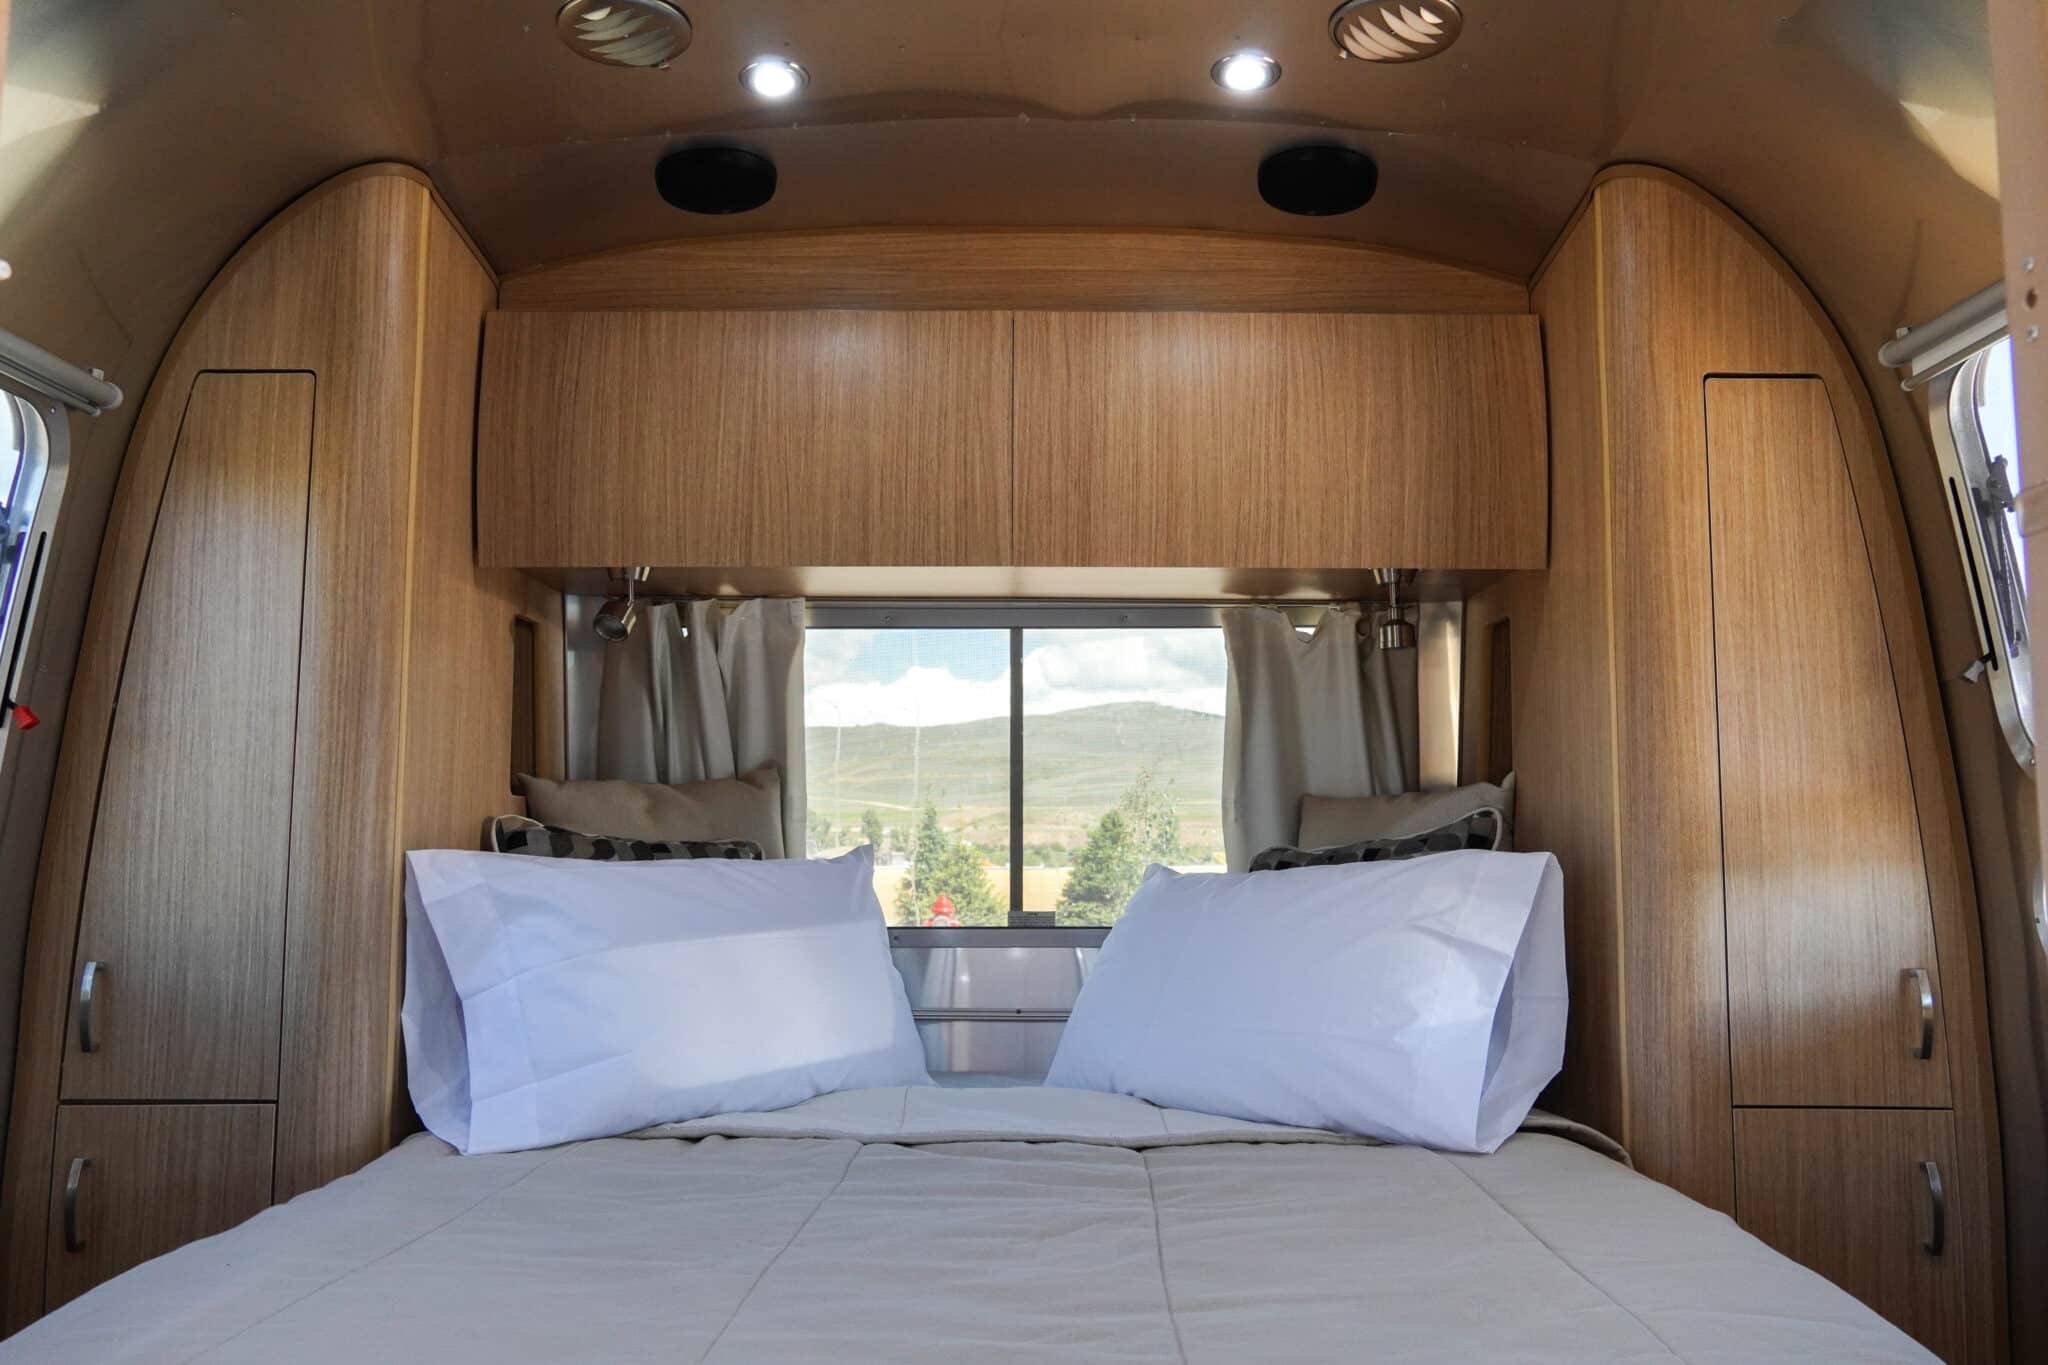 Camping RV Patio Product Guide: Our Airstream Outdoor Essentials